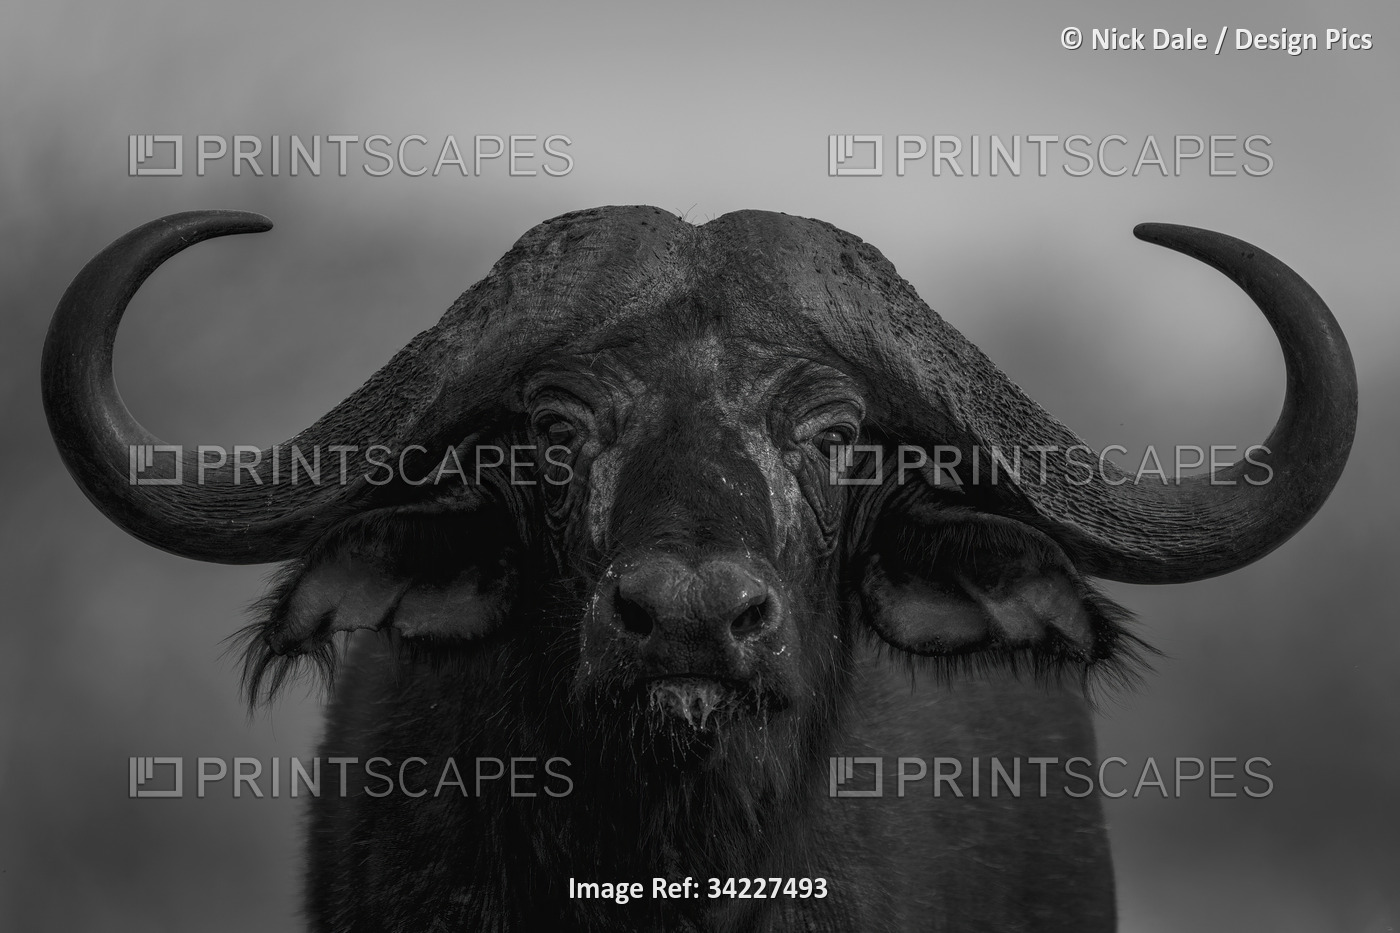 Mono, close-up portrait of a Cape Buffalo (Syncerus caffer) standing, eyeing ...